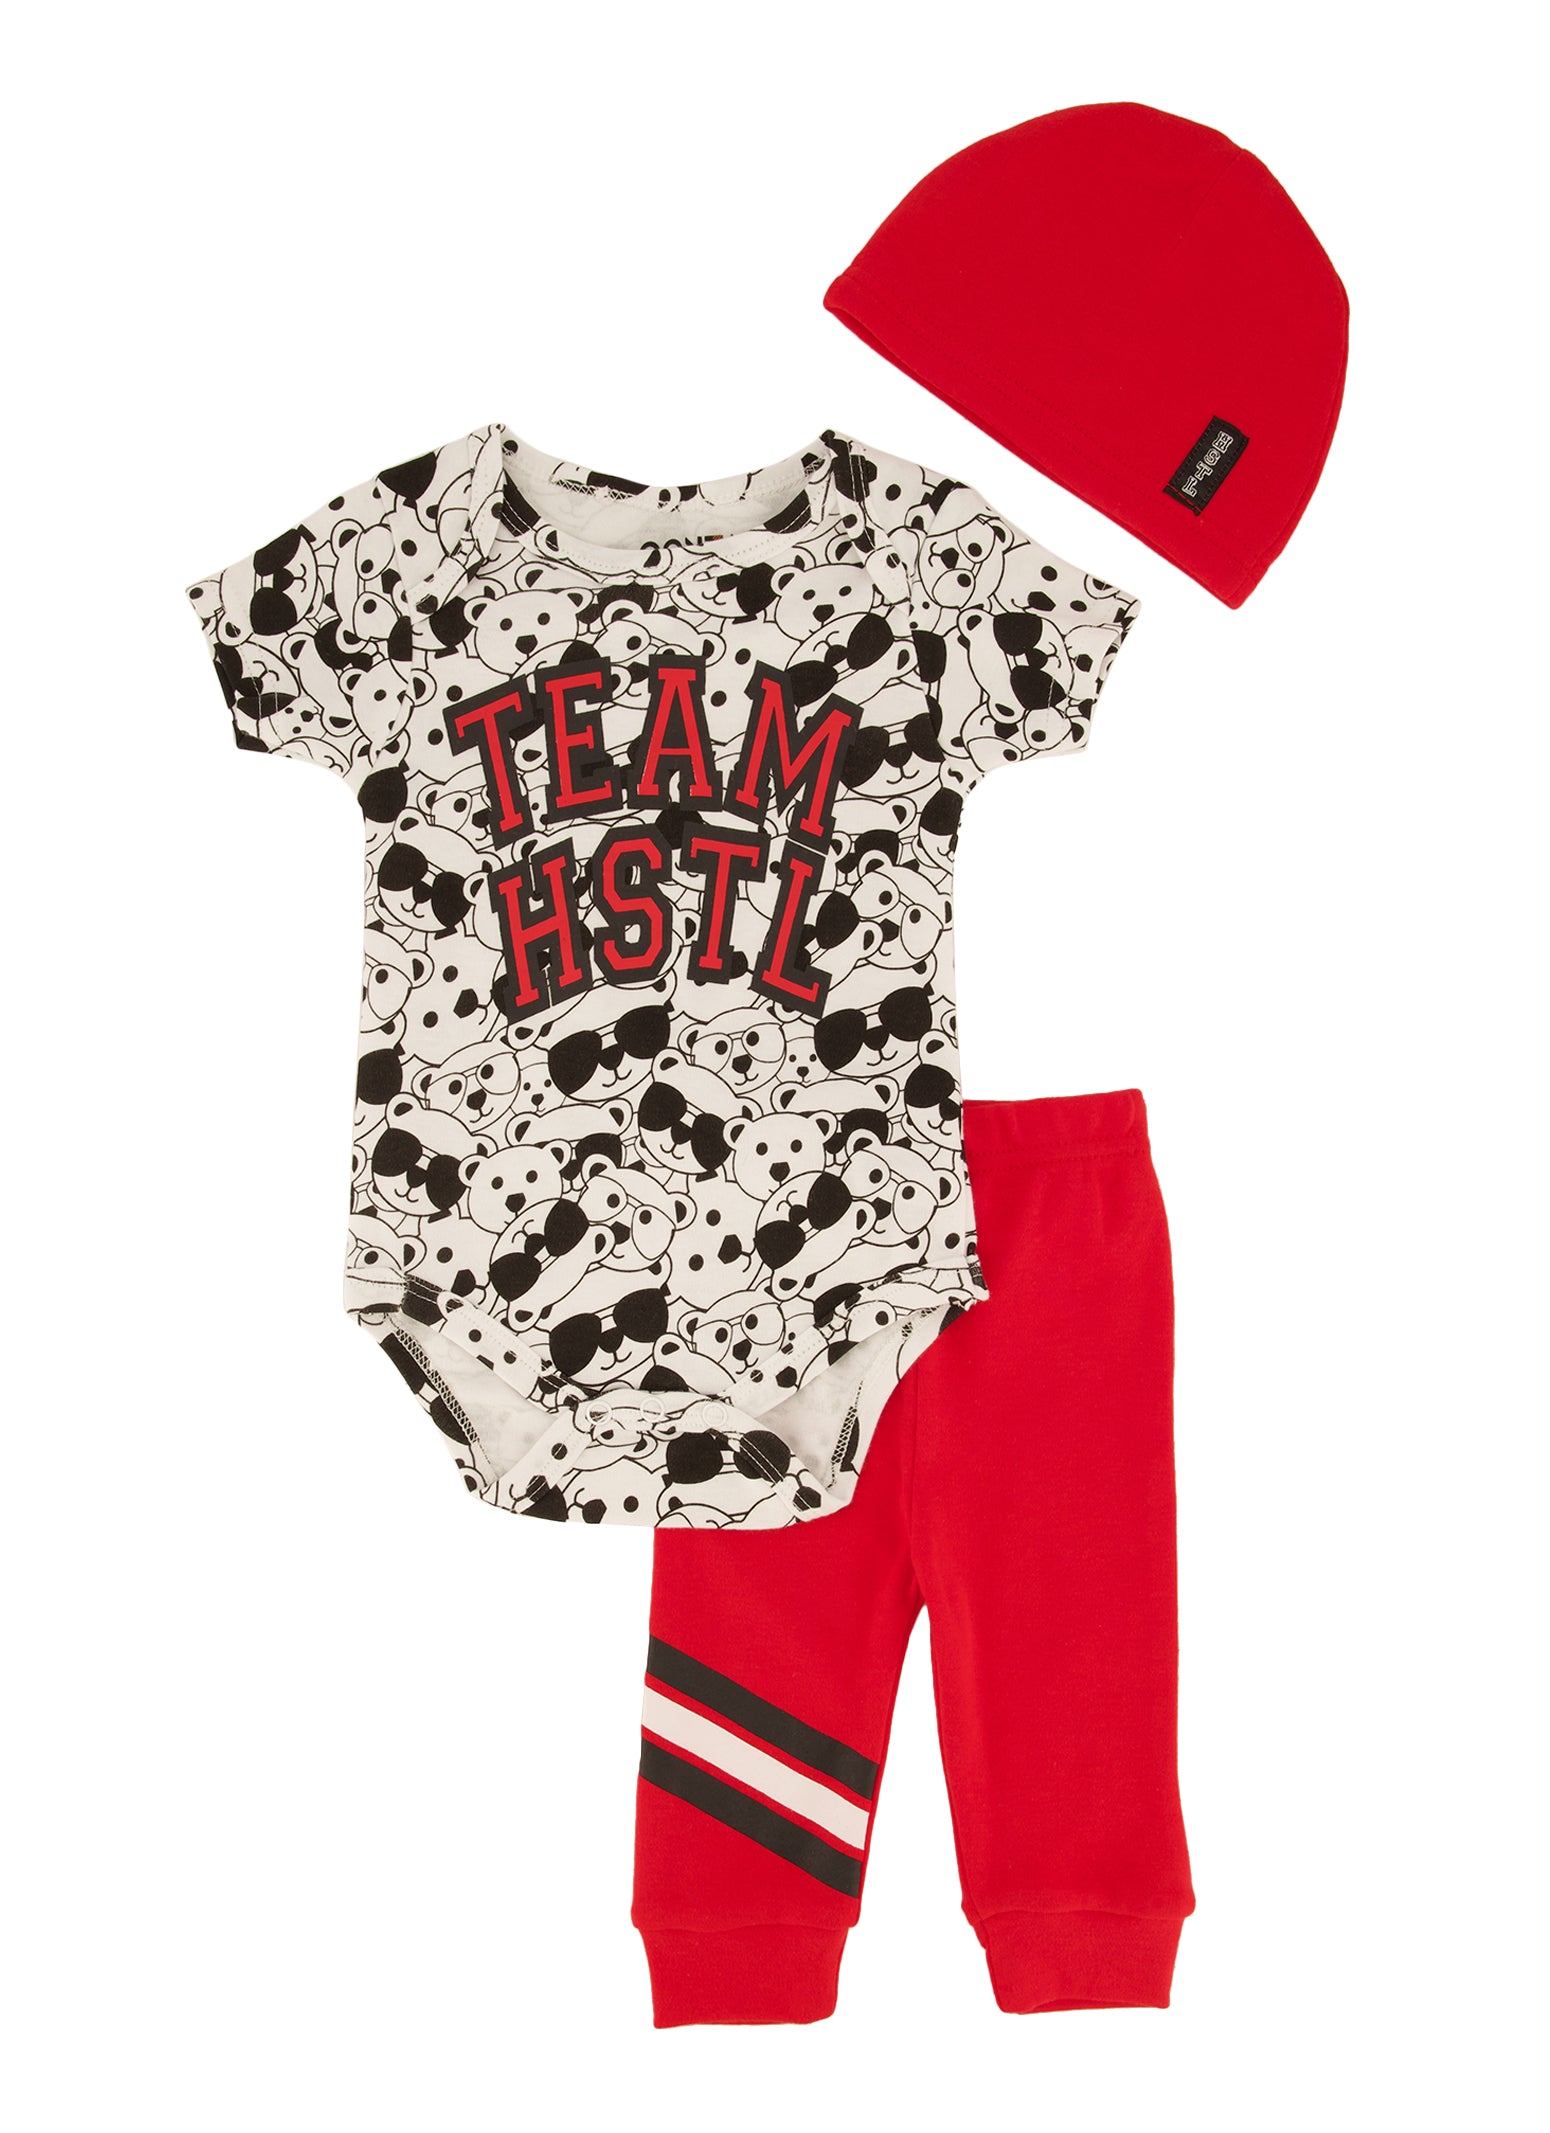 Baby Boys 0-9M Team Hstl Bear Printed Graphic Bodysuit with Joggers and Beanie, Red, Size 3-6M